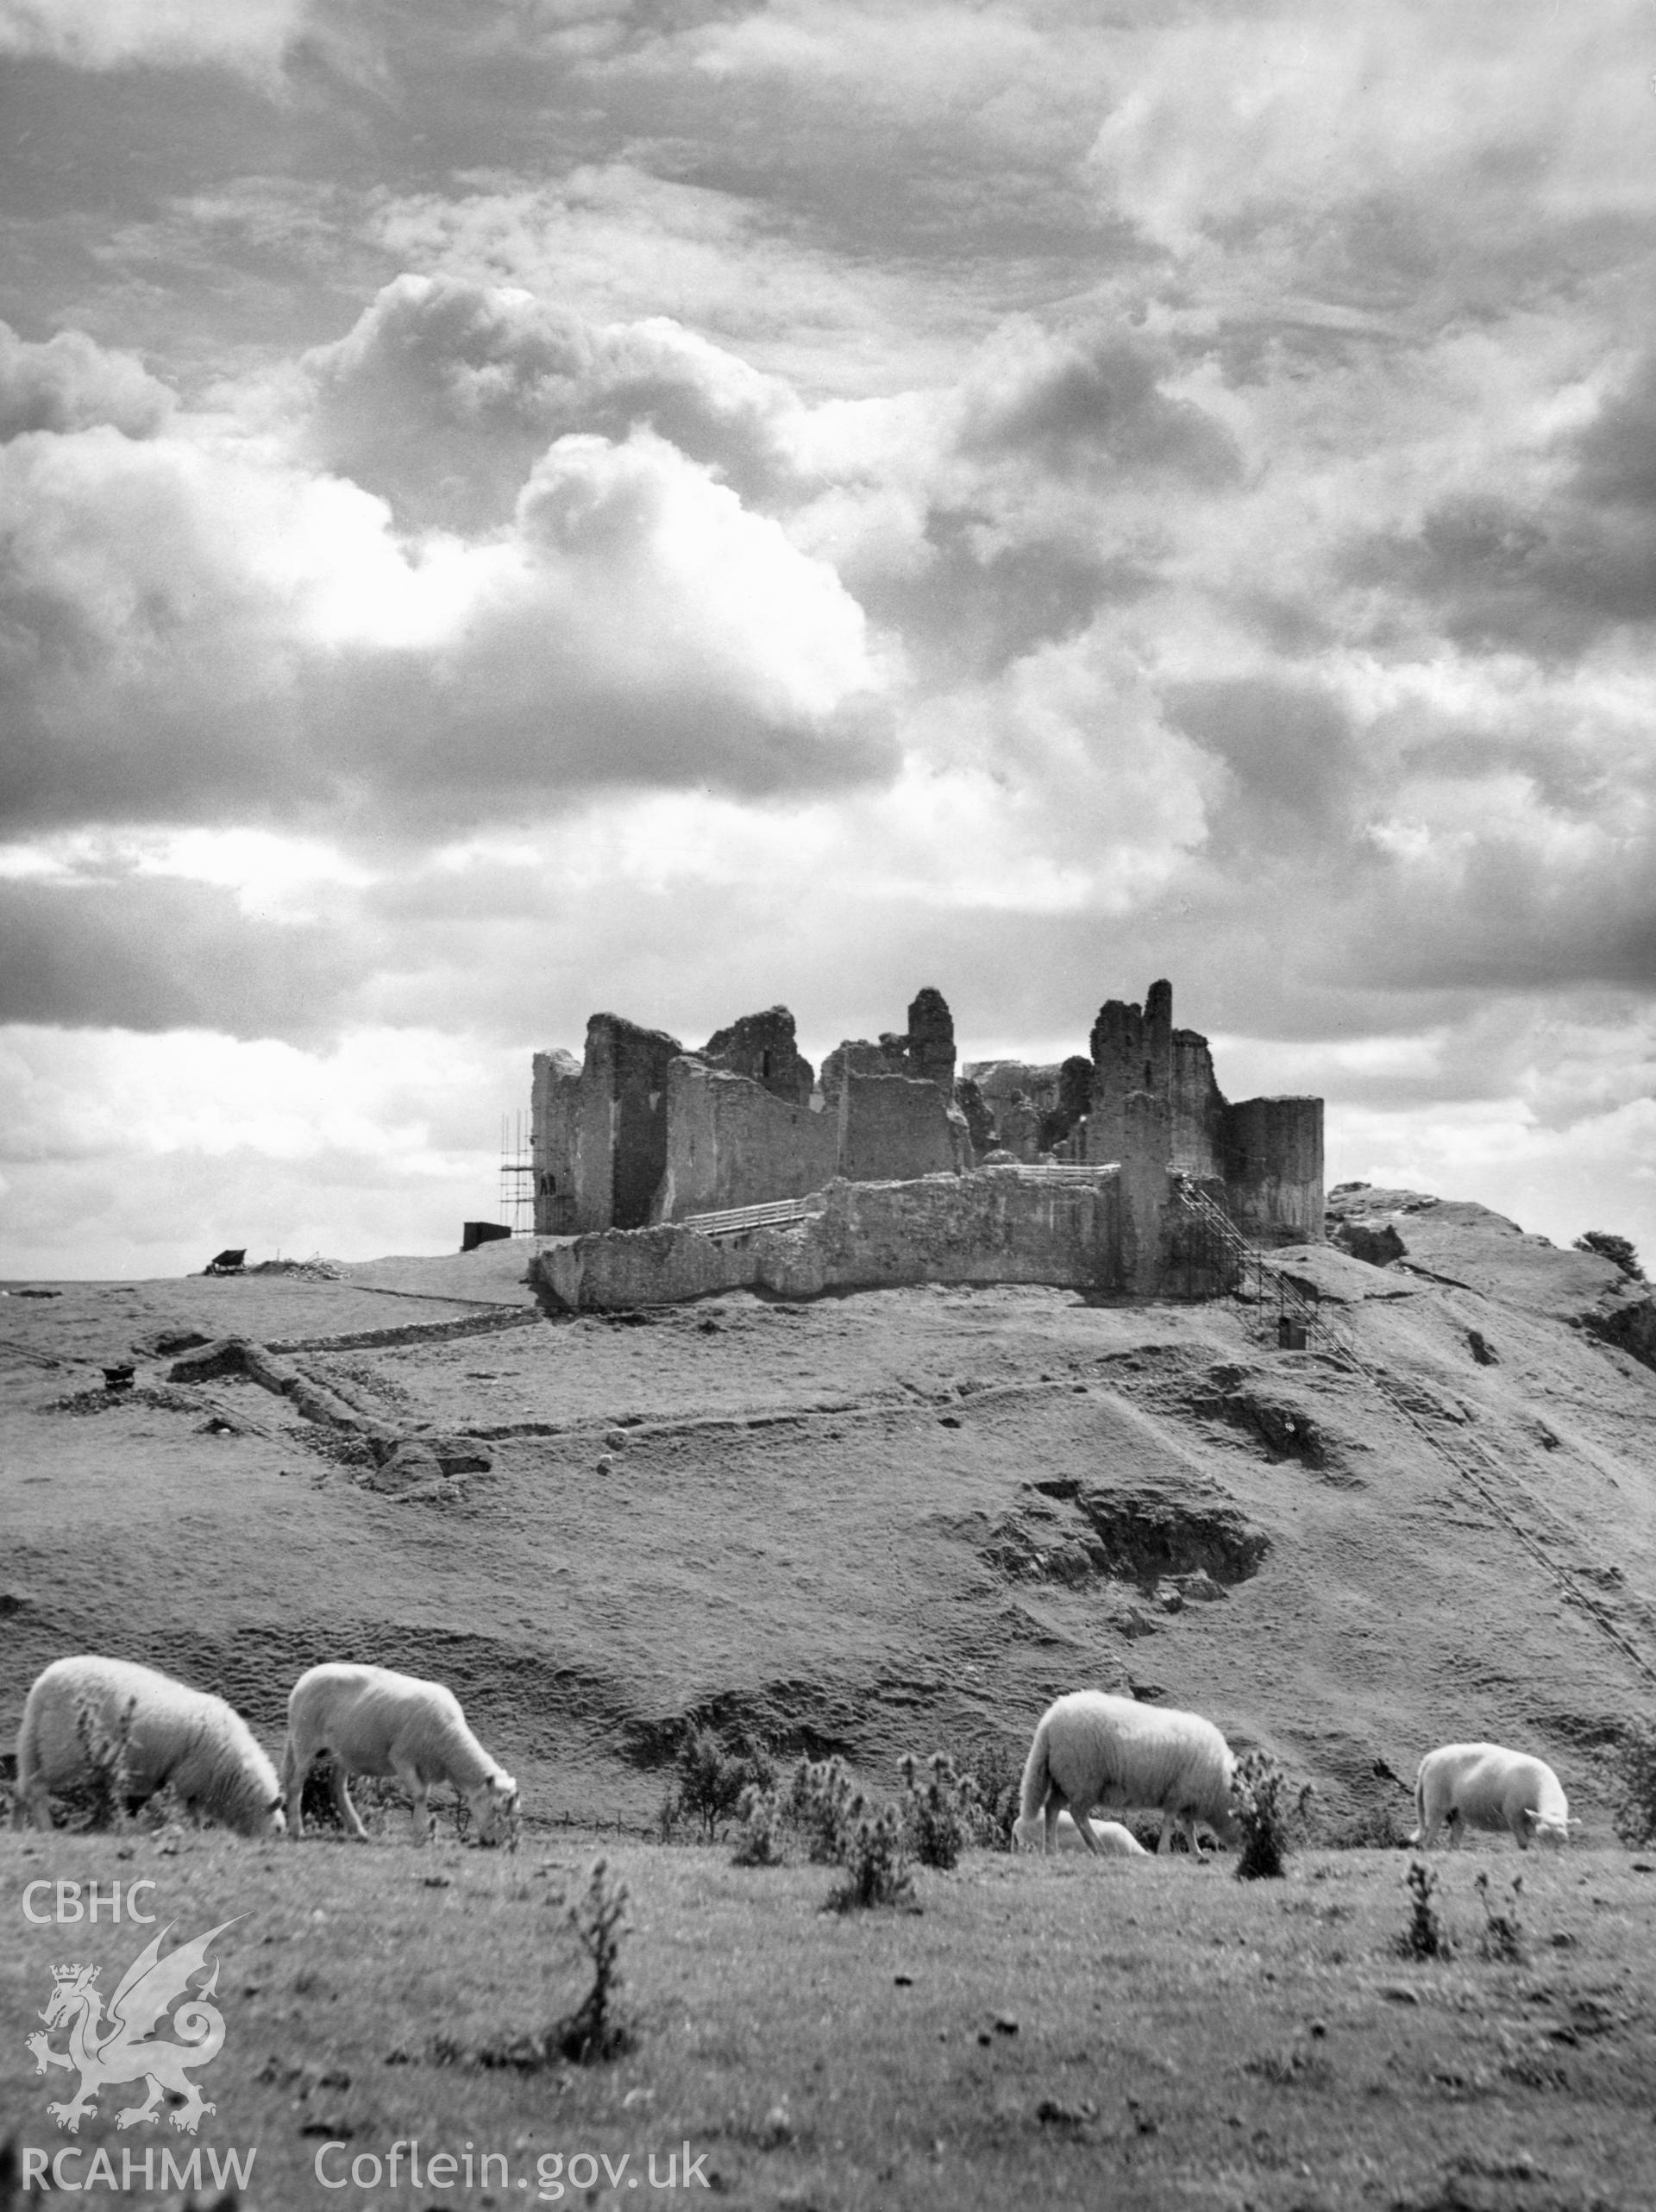 1 b/w print showing aspect of Carreg Cennen castle with scaffolding and sheep, collated by the former Central Office of Information.